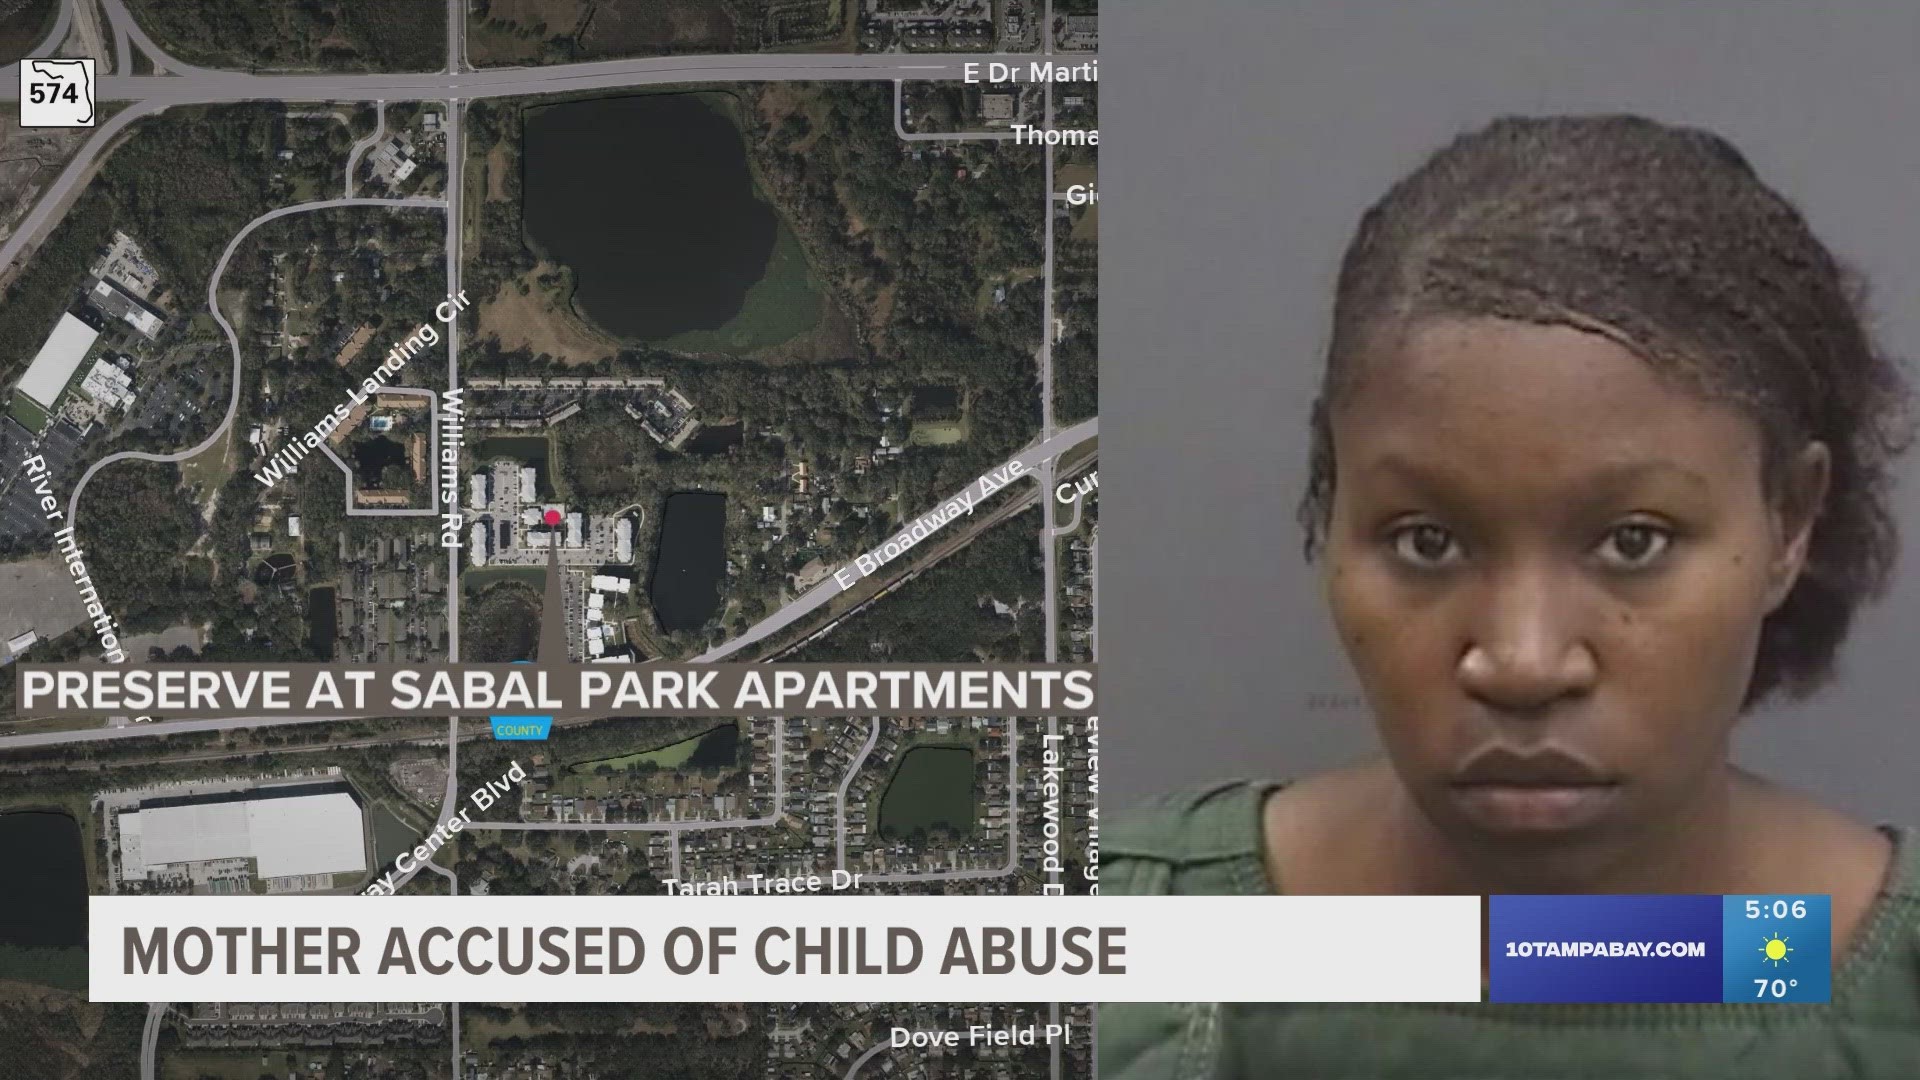 Karyn Parrish, 28, faces a charge of child abuse.